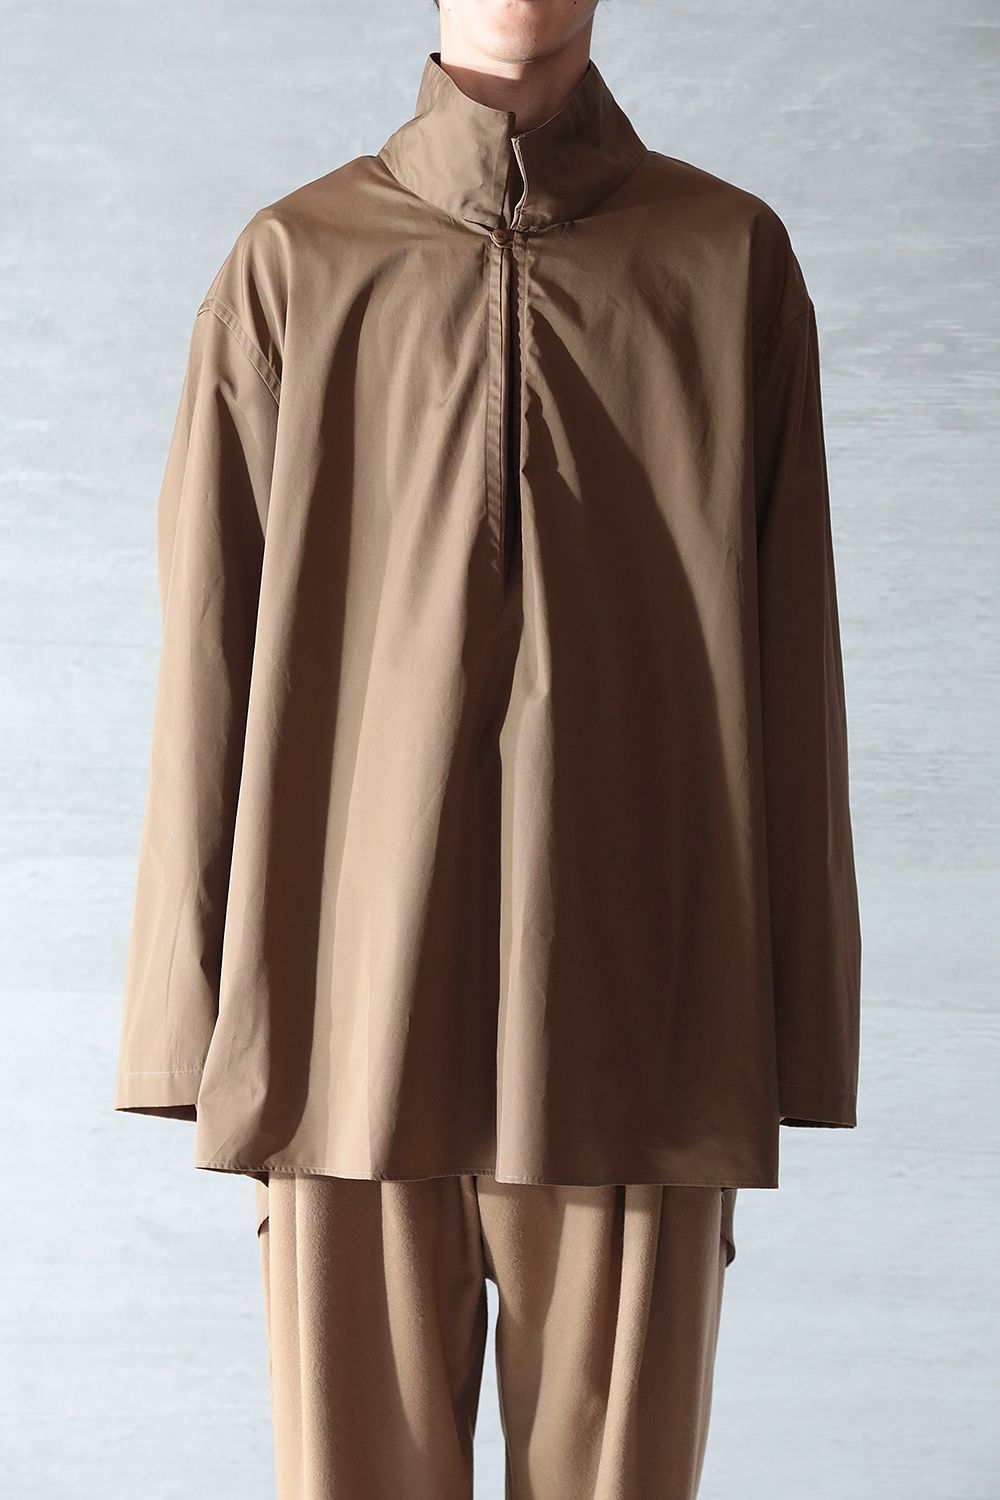 HED MAYNER - 【ラスト1点】EXTENDED-COLLAR SHIRT(BROWN) | Acacia